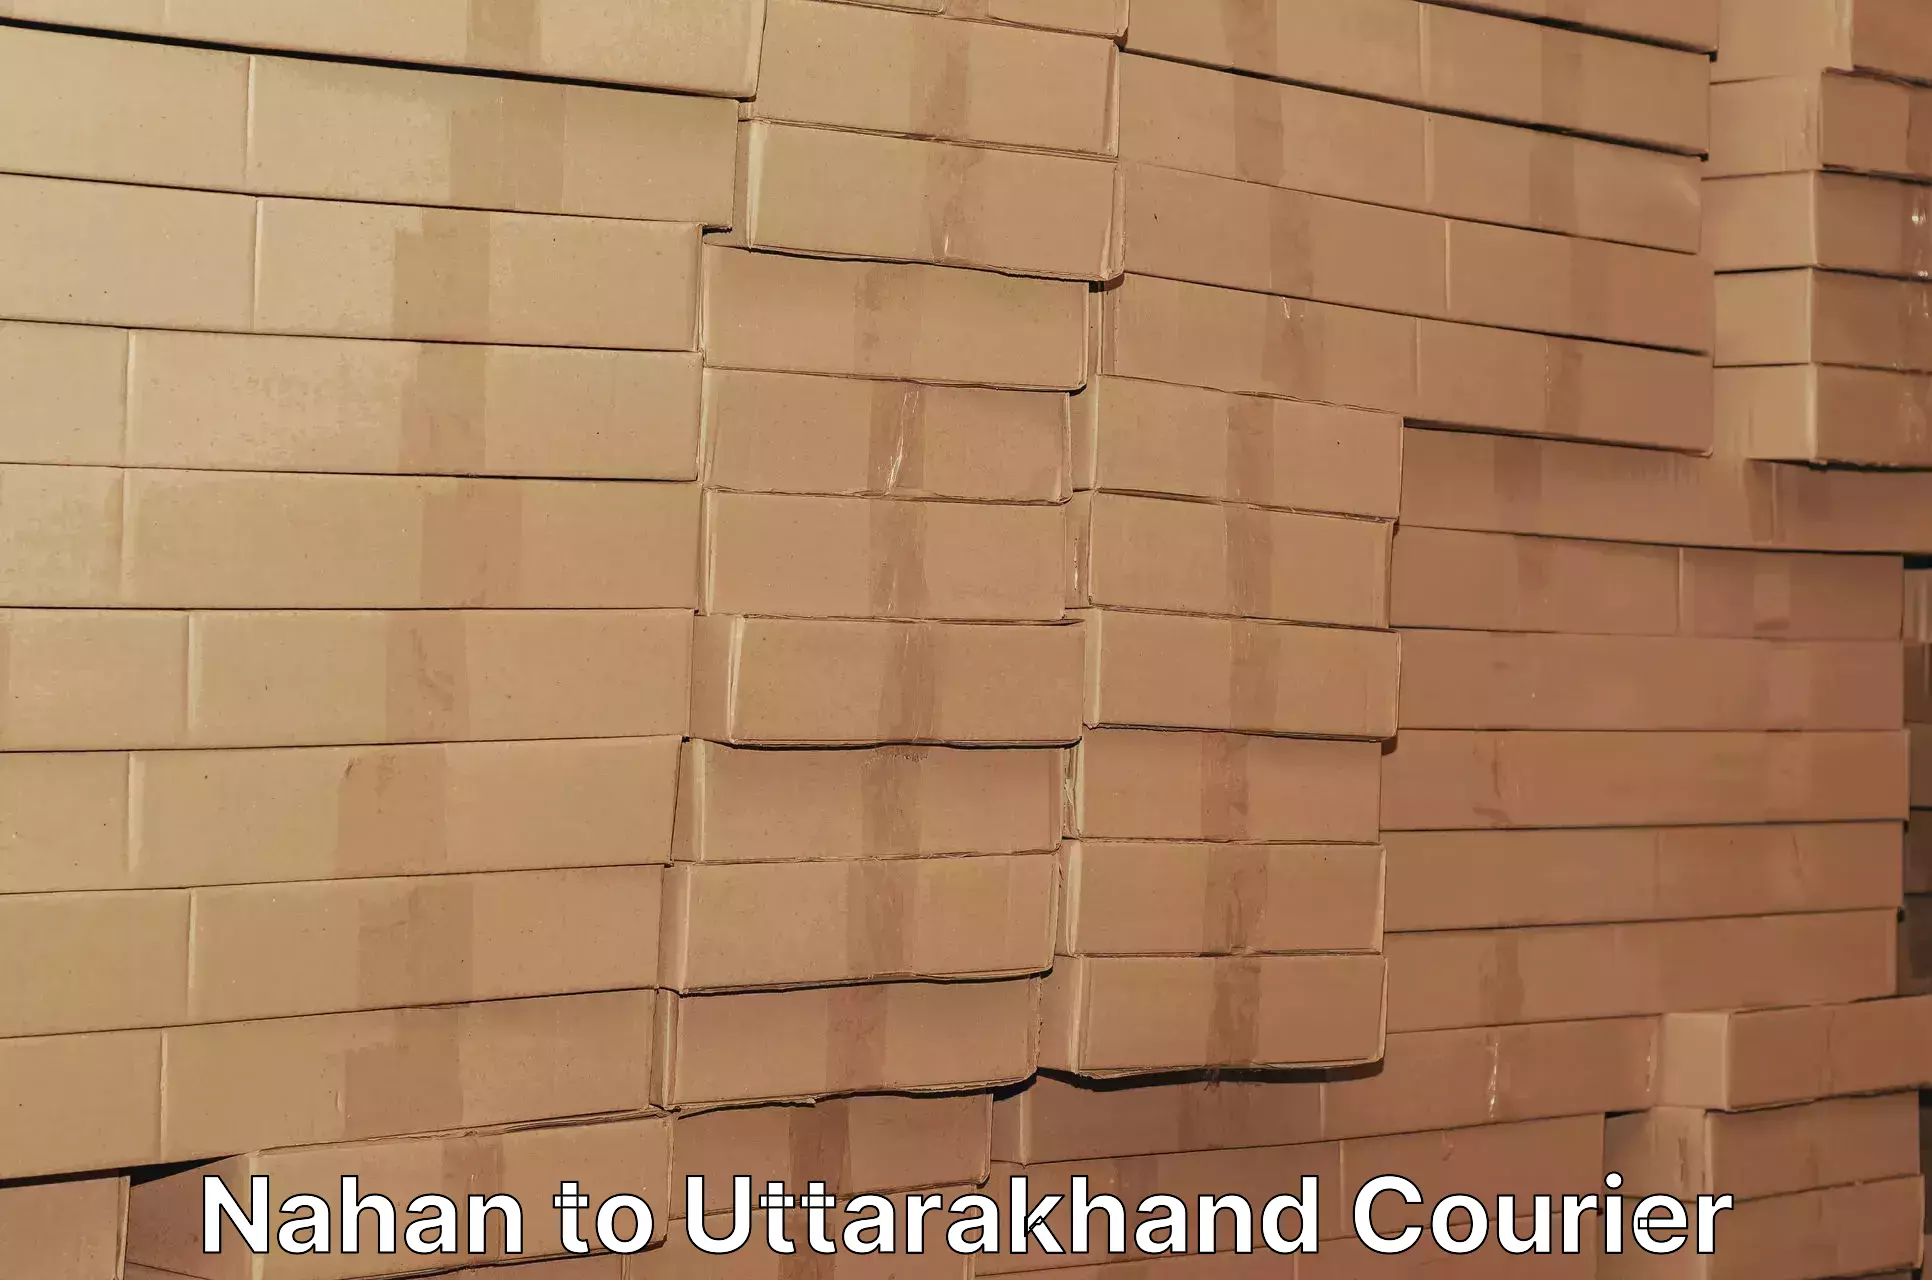 Express delivery capabilities Nahan to Uttarakhand